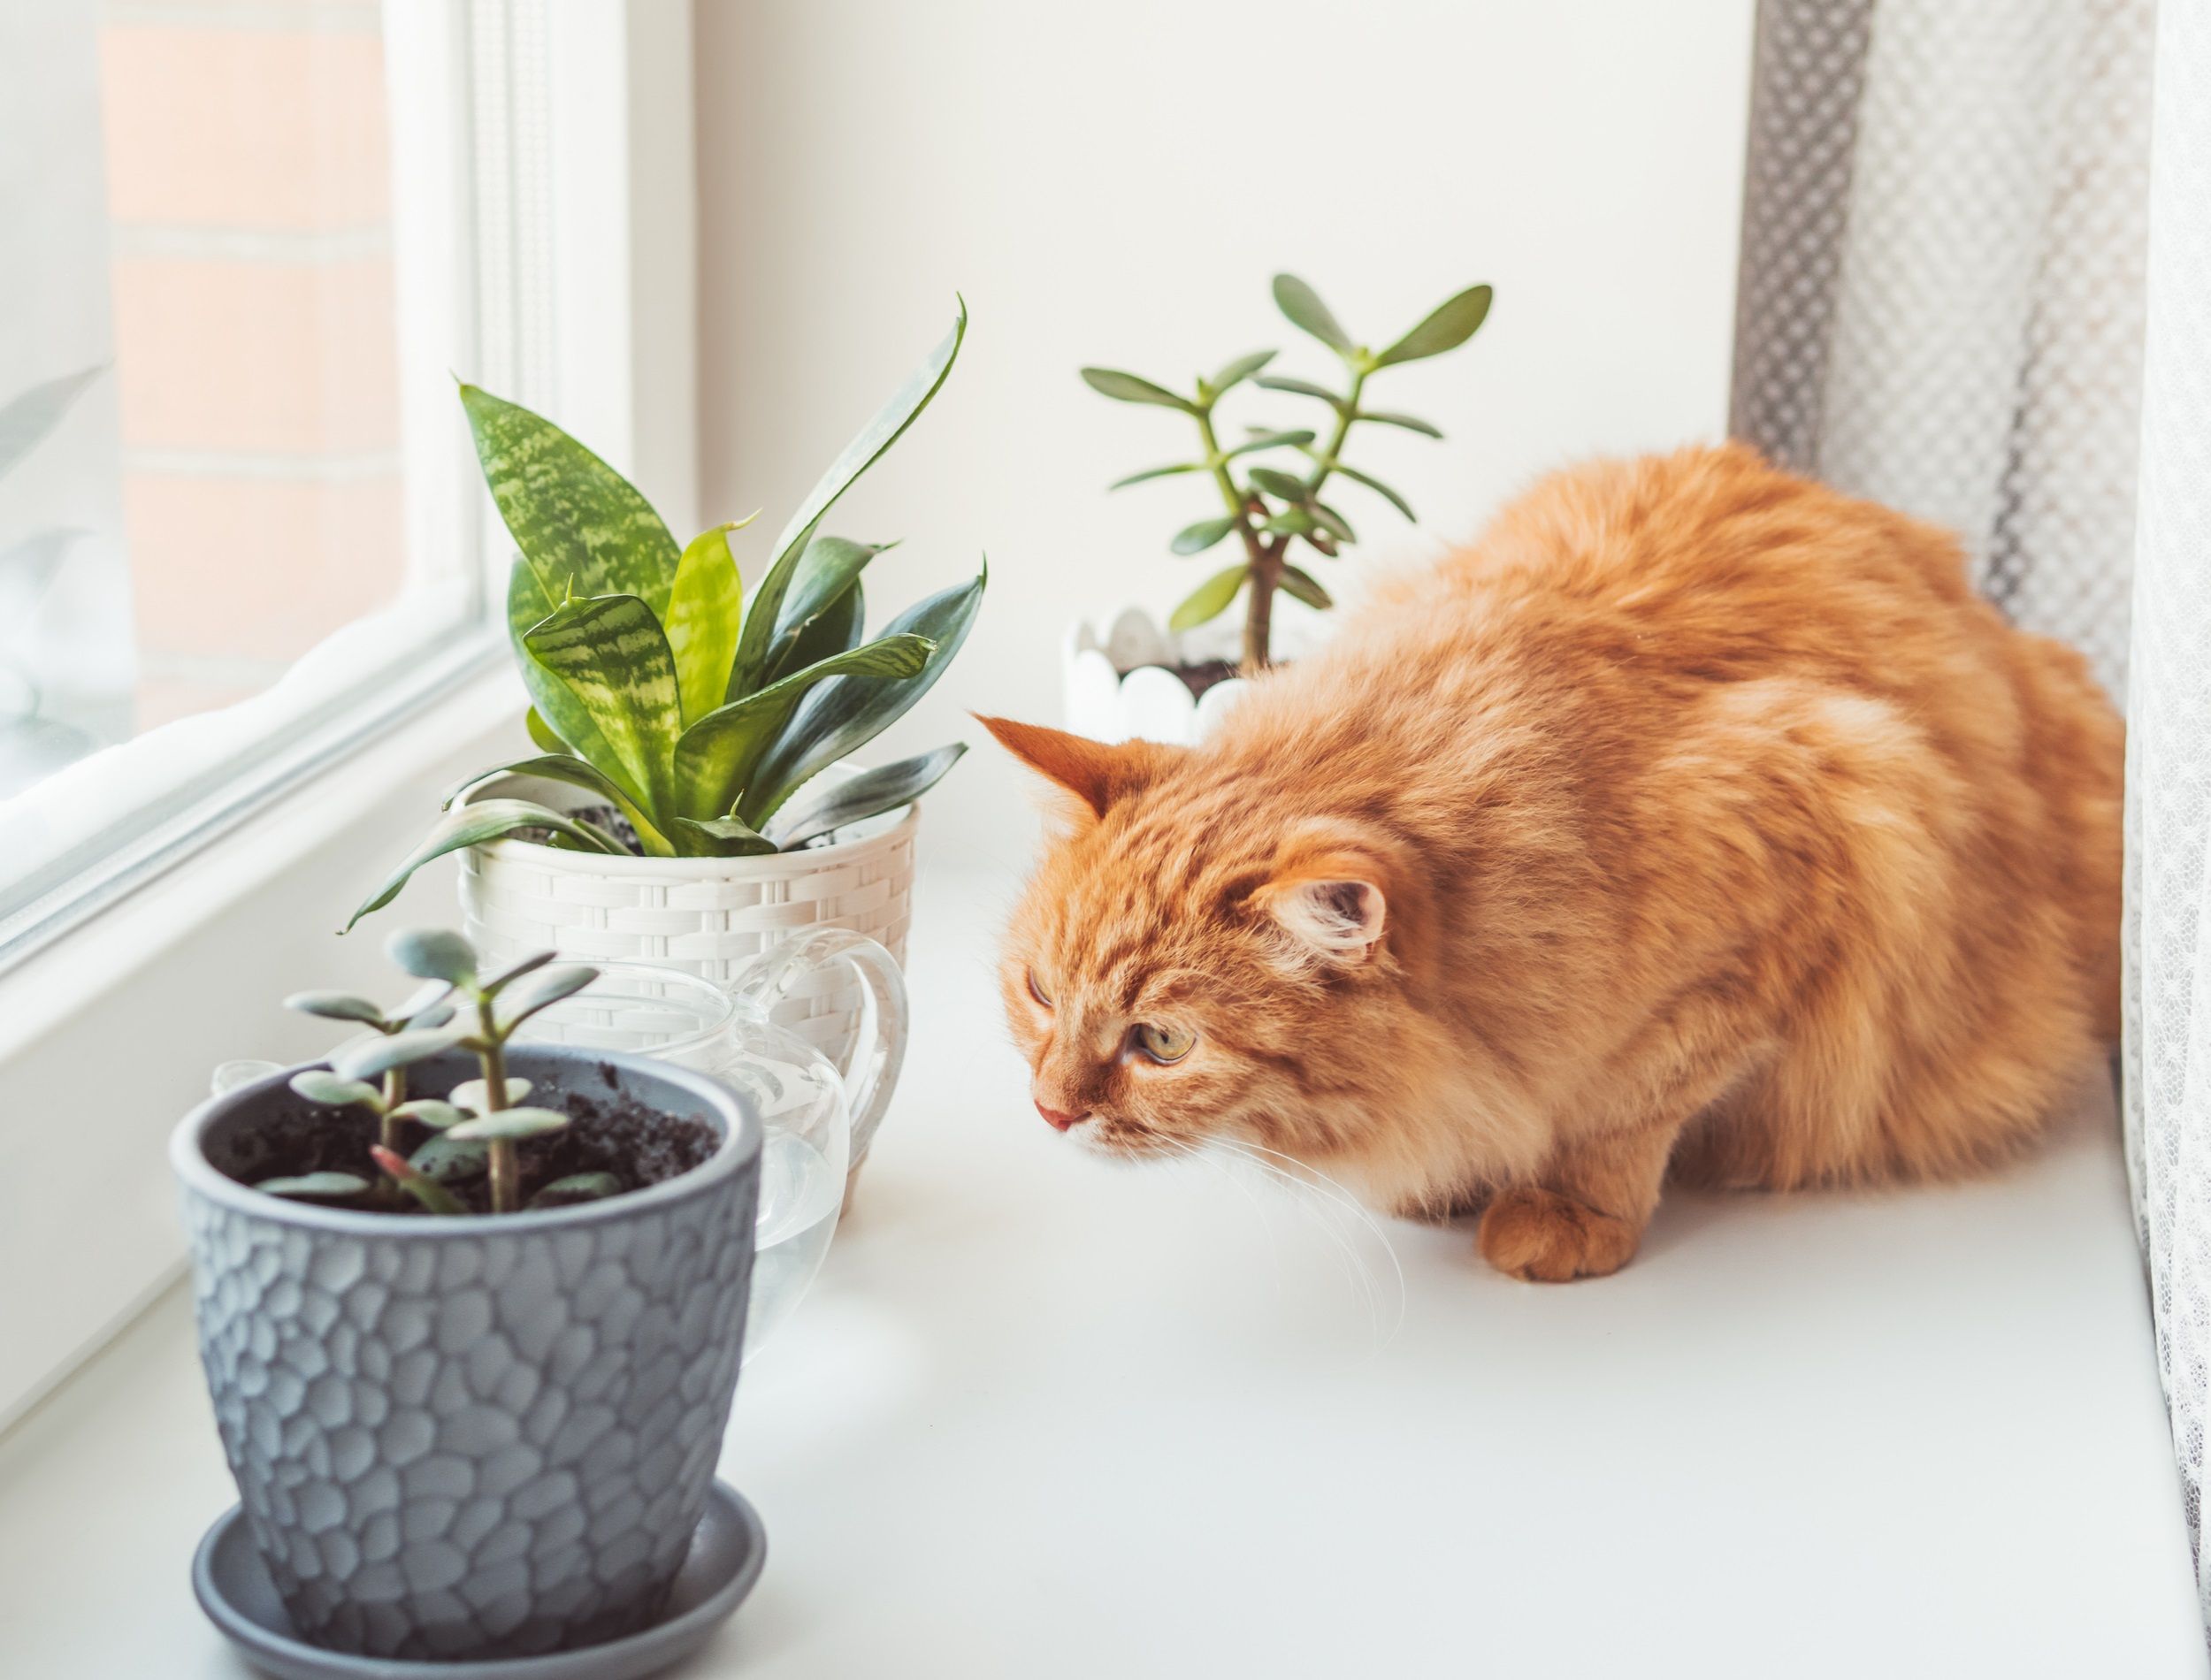 Cute ginger cat sniffs indoors plants. Flower pots with Crassula and Sansevieria. Fluffy pet smells succulent plants on white window sill. Peaceful botanical hobby. Gardening at home.